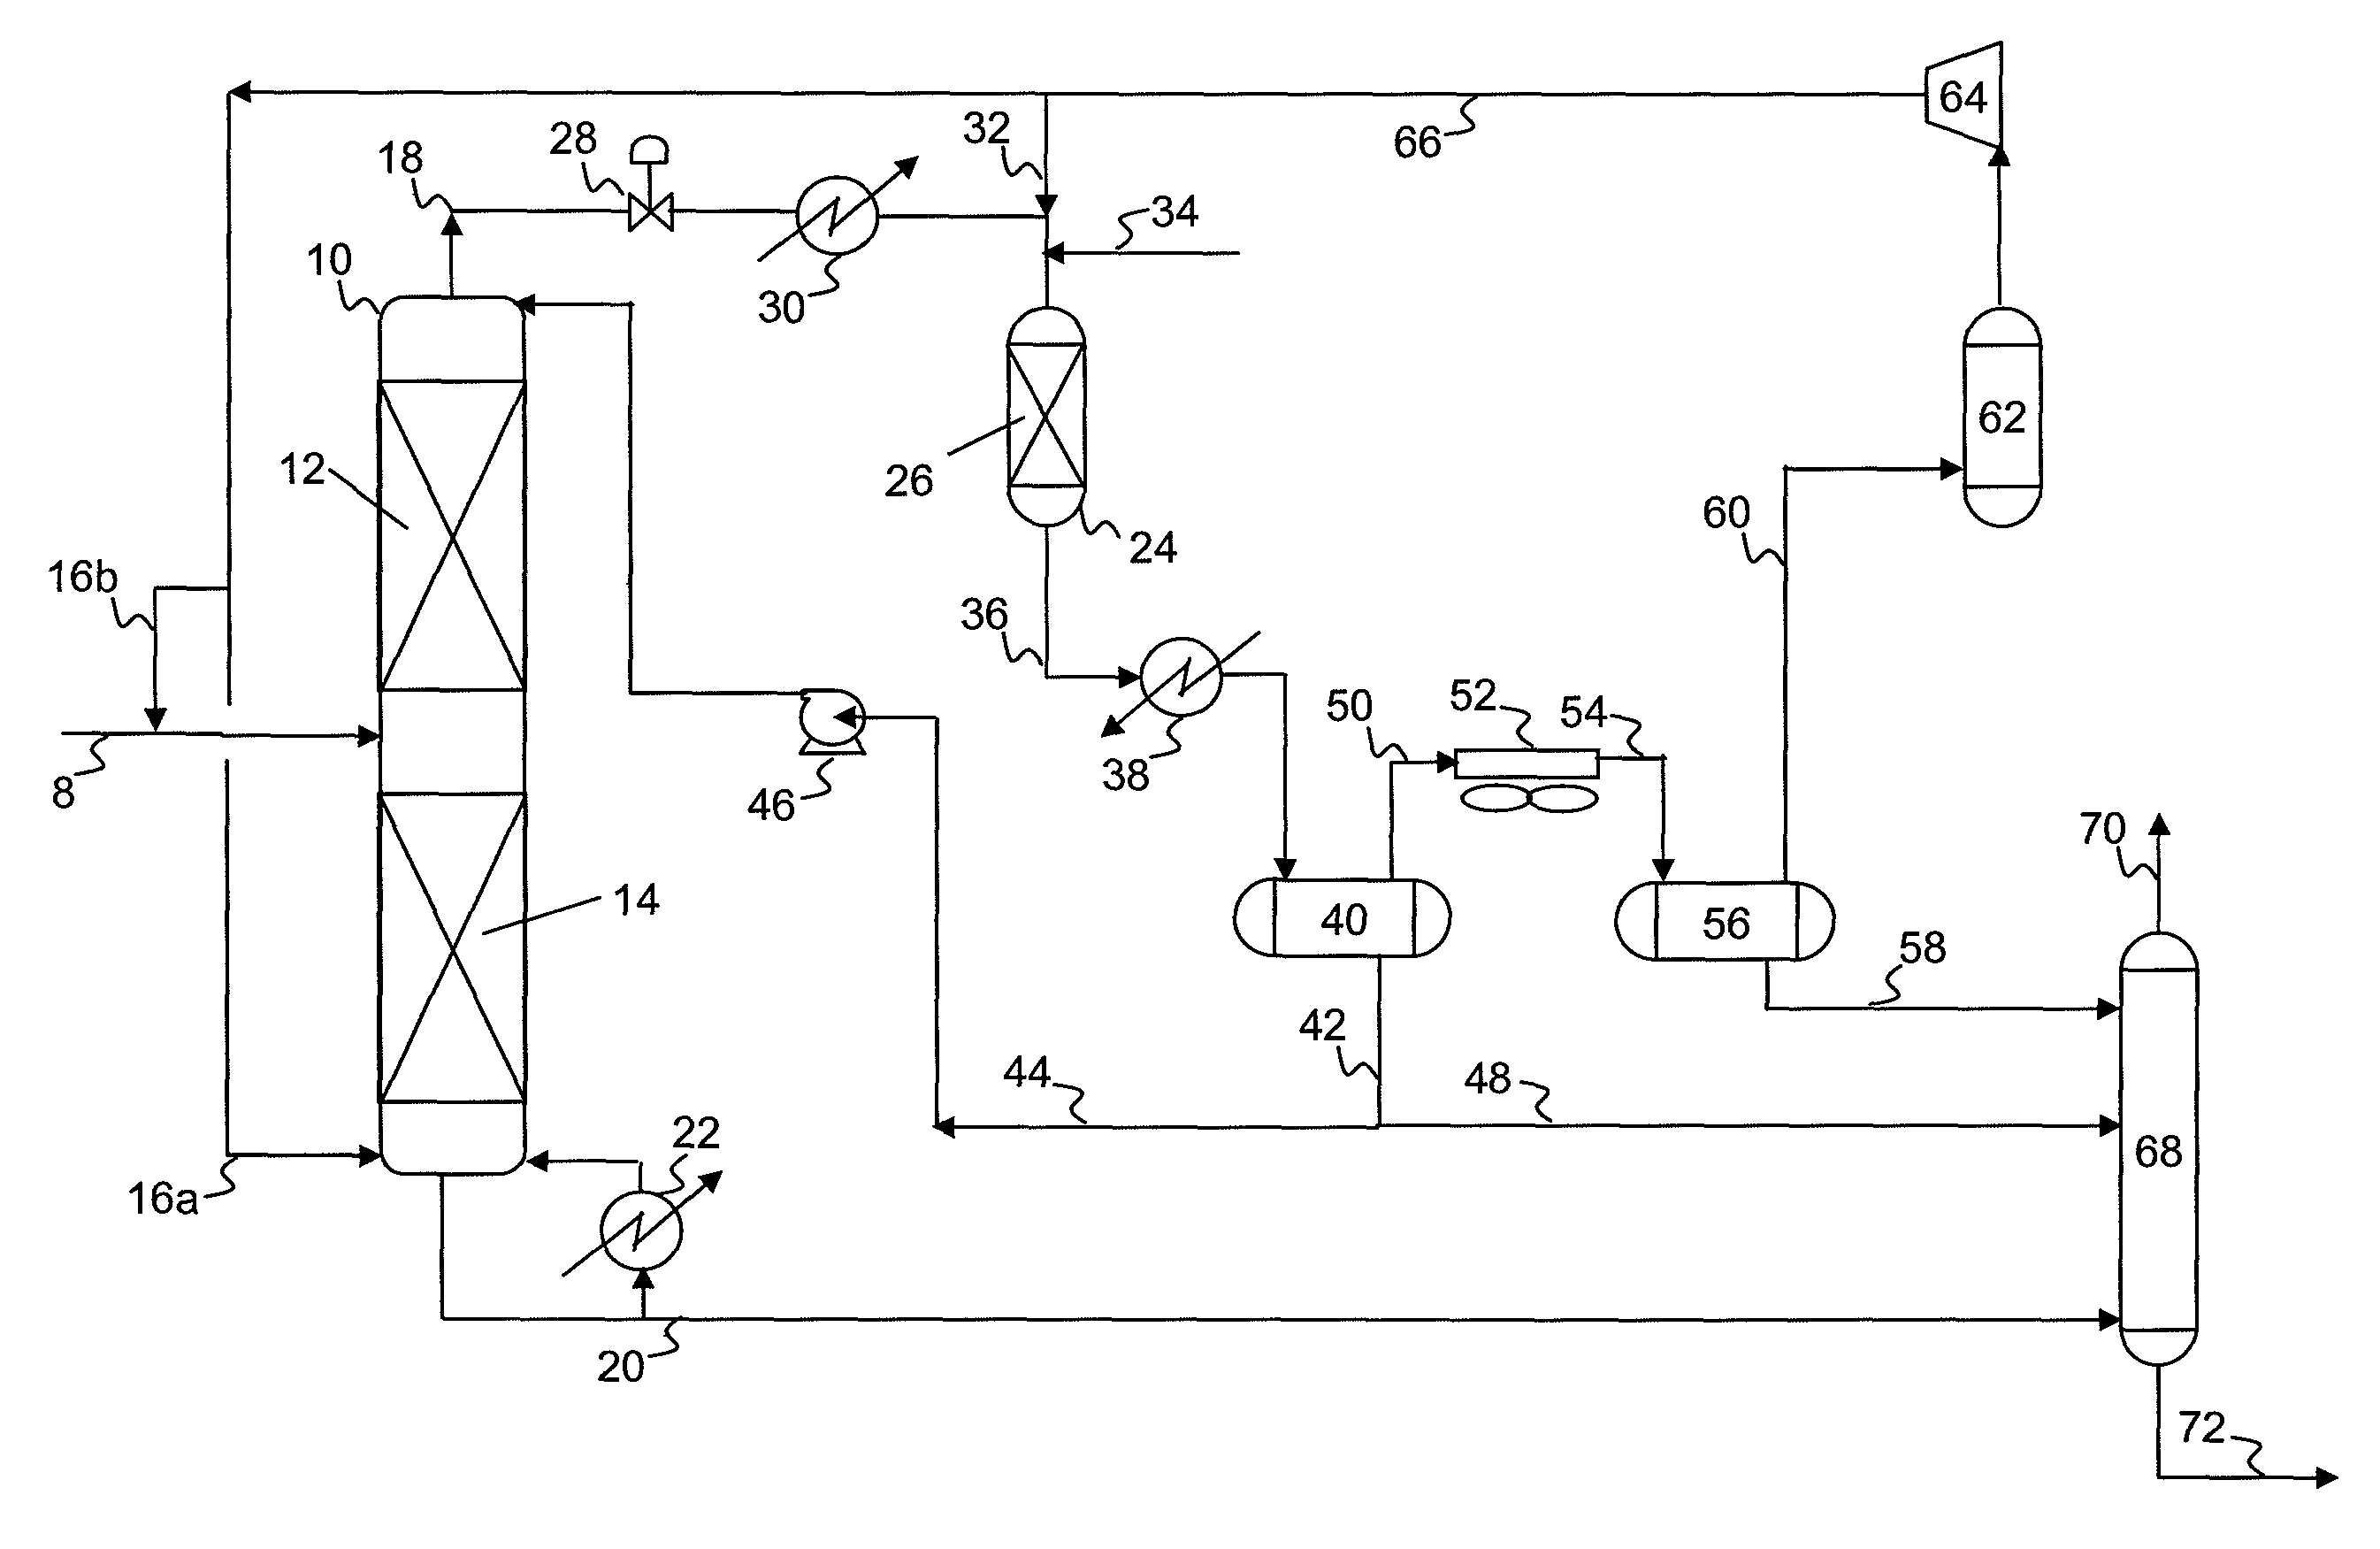 Process to hydrodesulfurize FCC gasoline resulting in a low-mercaptan product